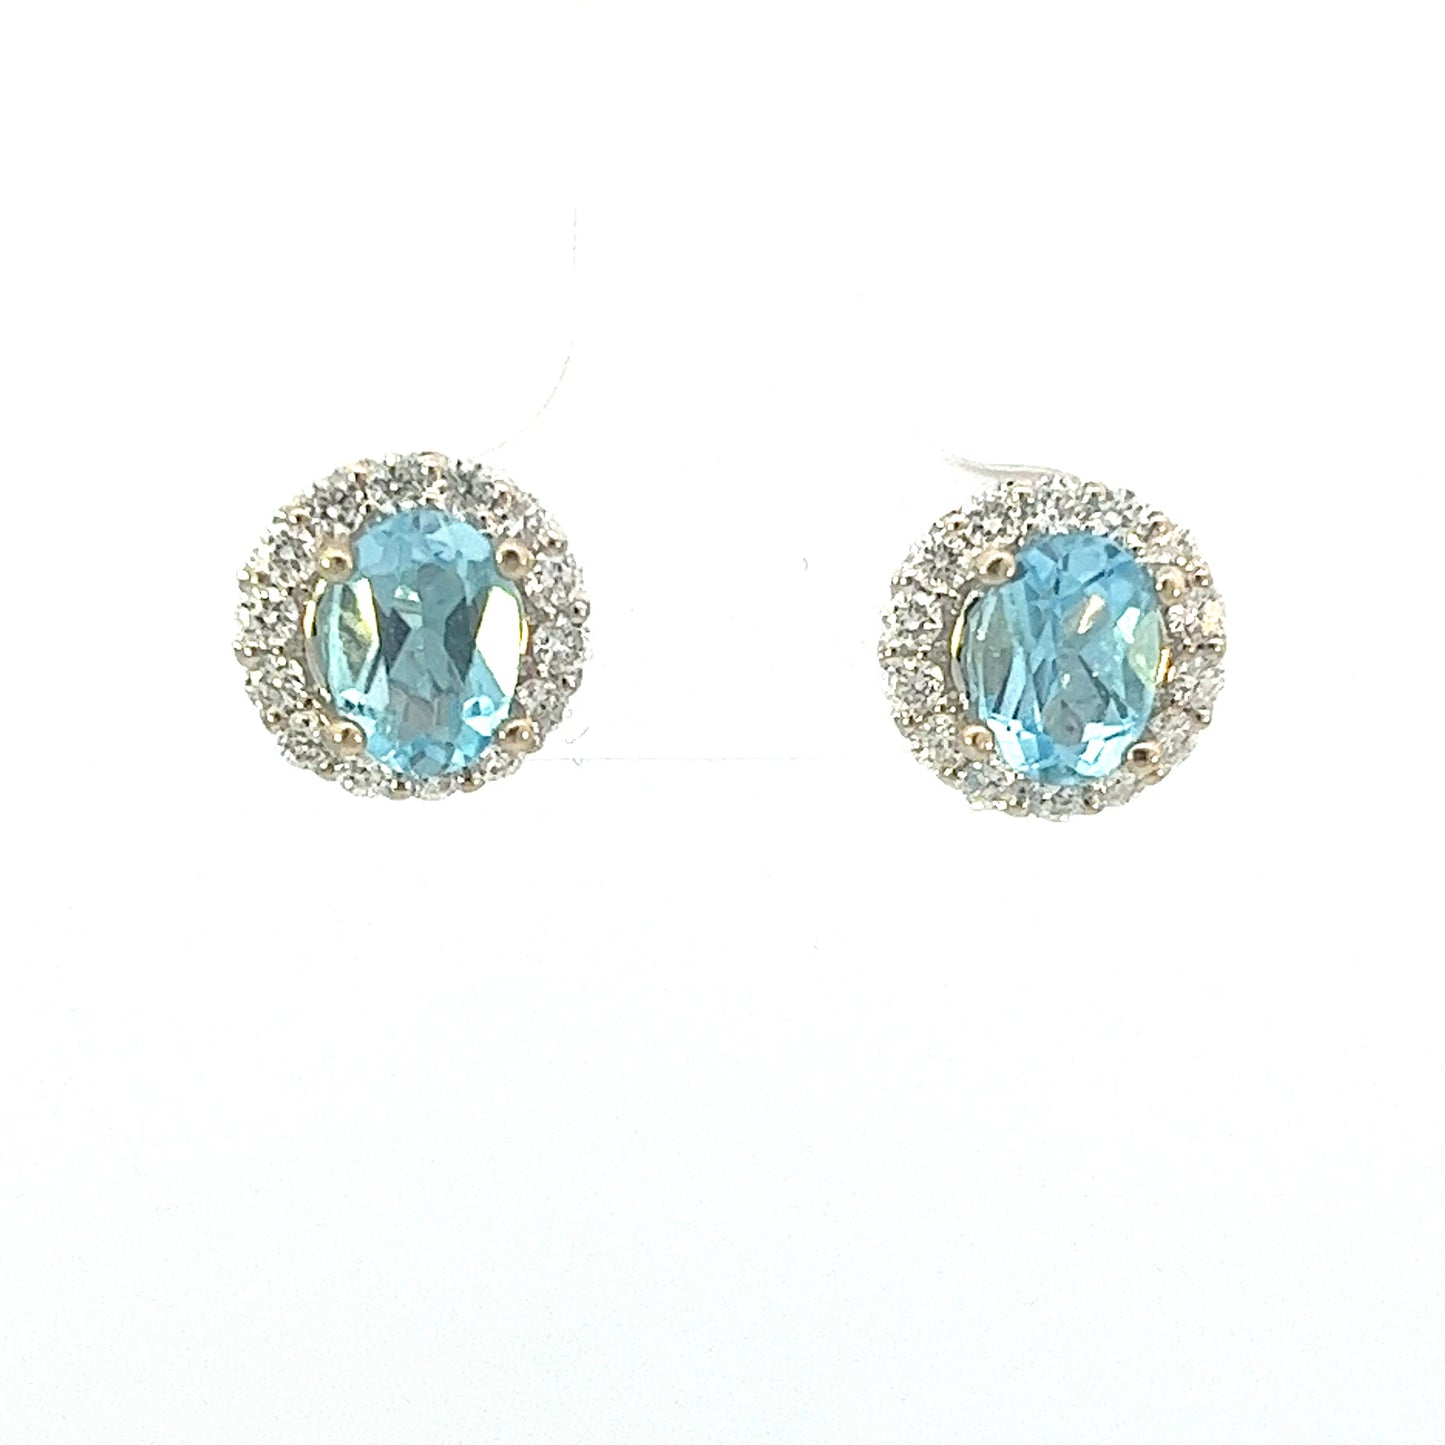 18k white gold 1.5ct total weight oval blue topaz and diamond earrings